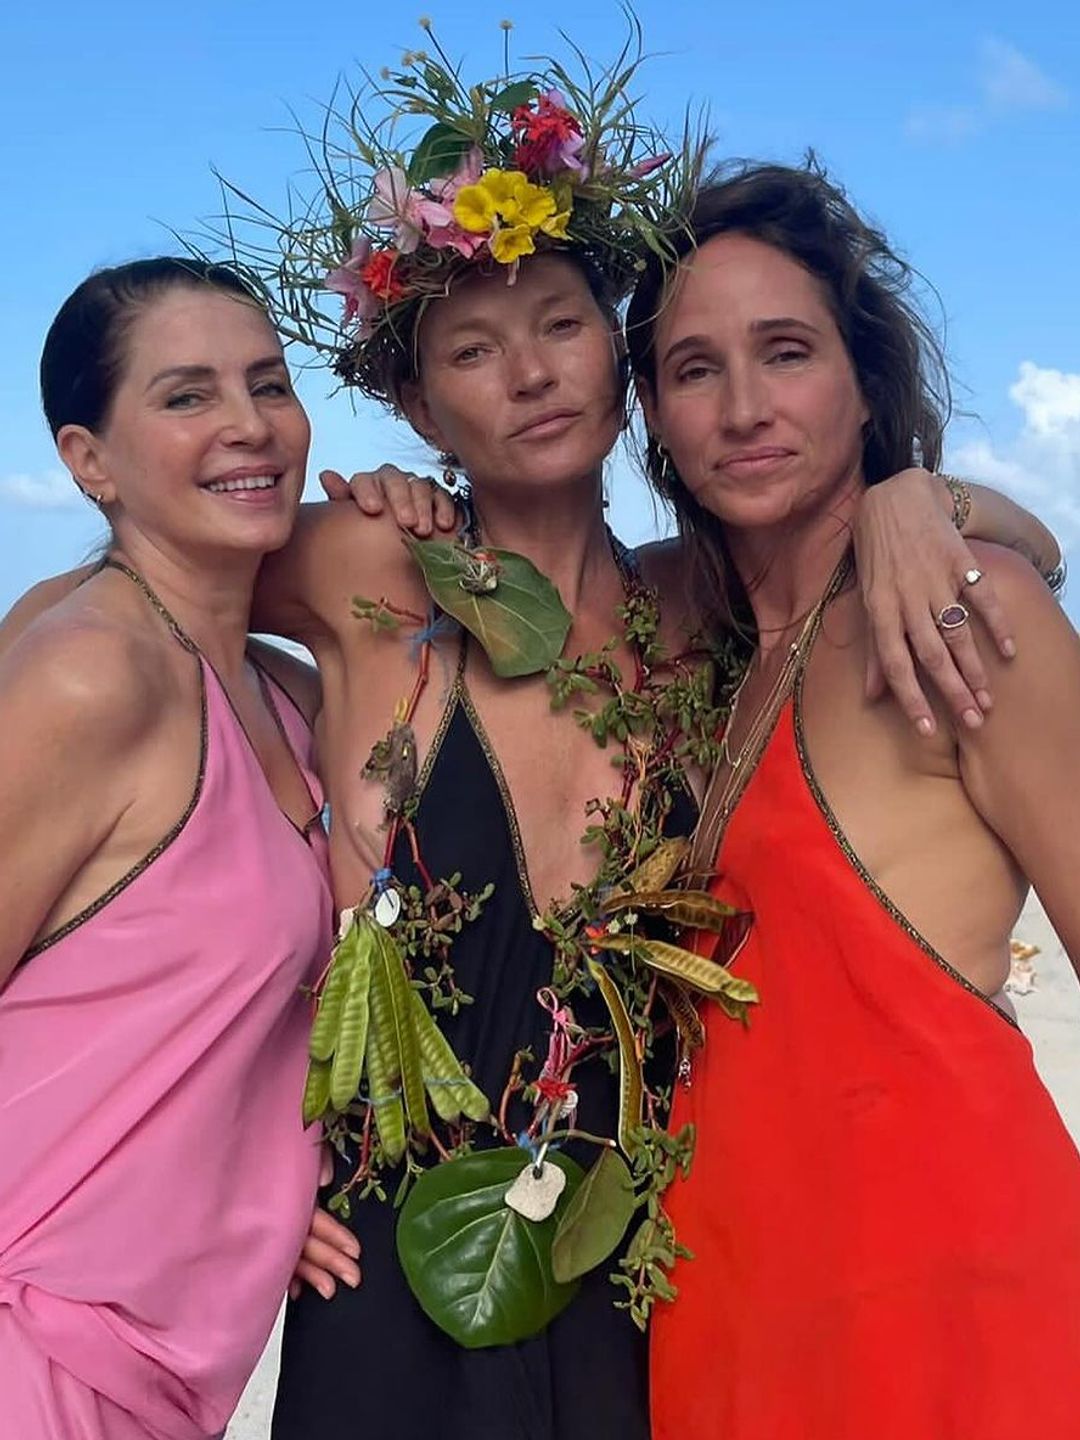 Kate Moss poses with two of her best friends at her early birthday celebration 